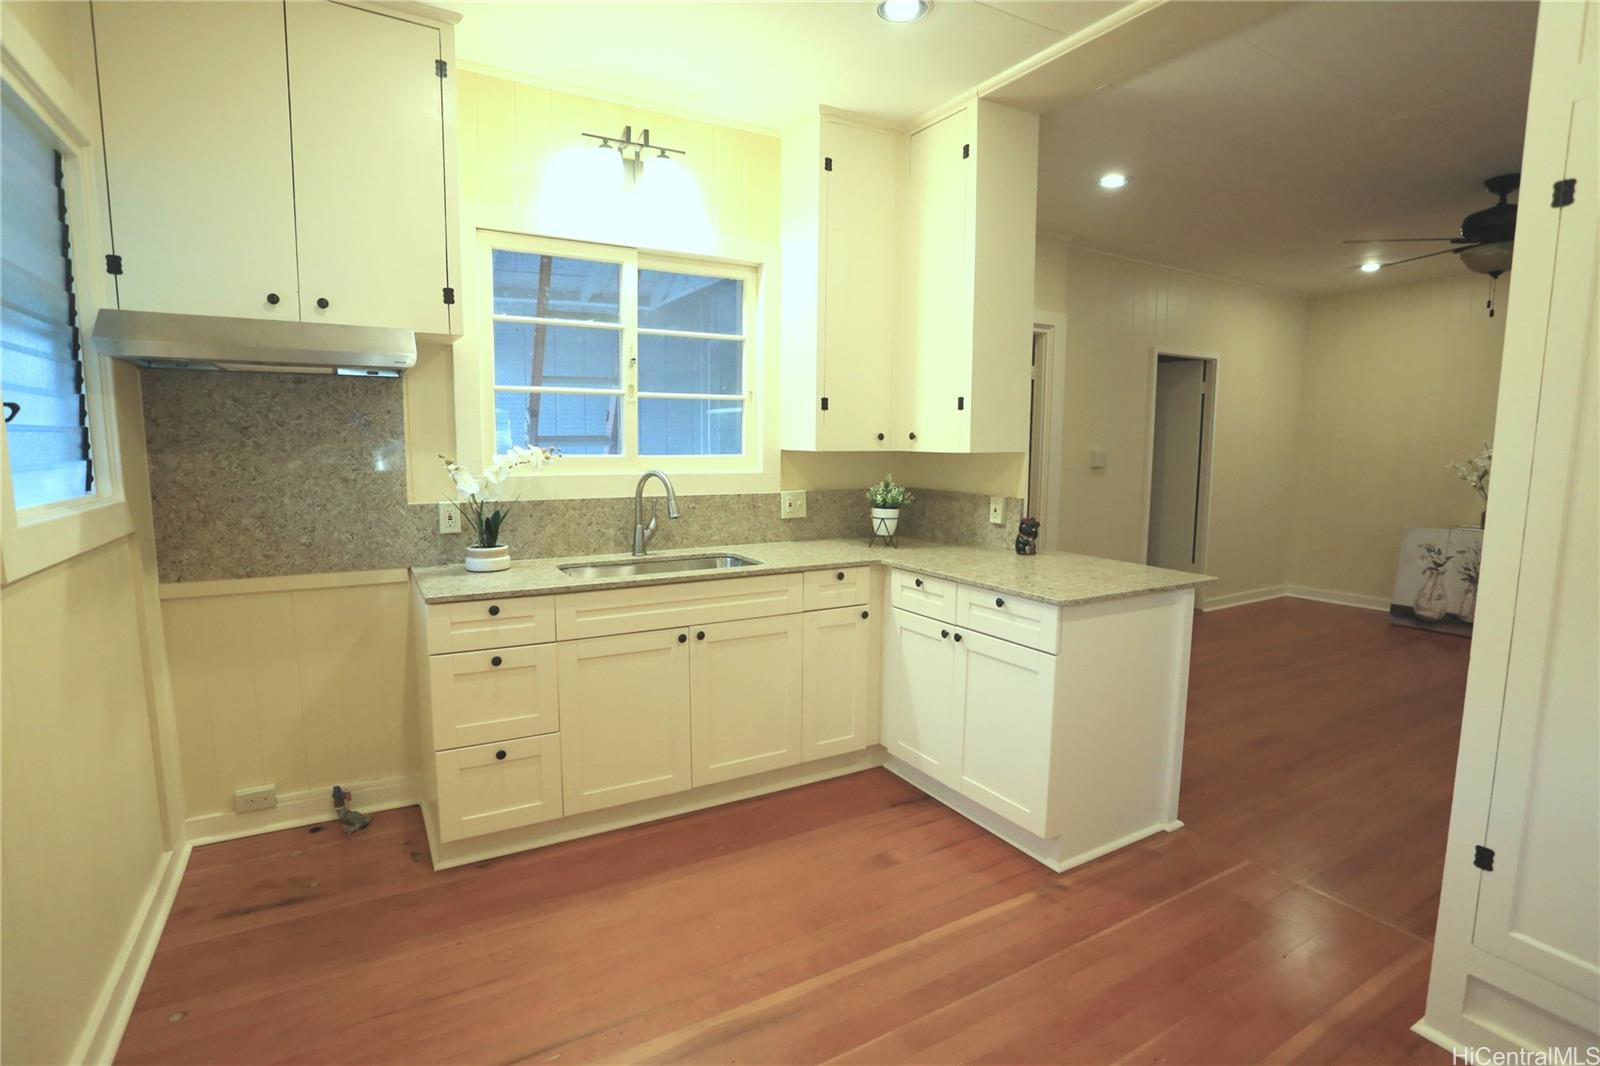 a view of a kitchen counter space and windows